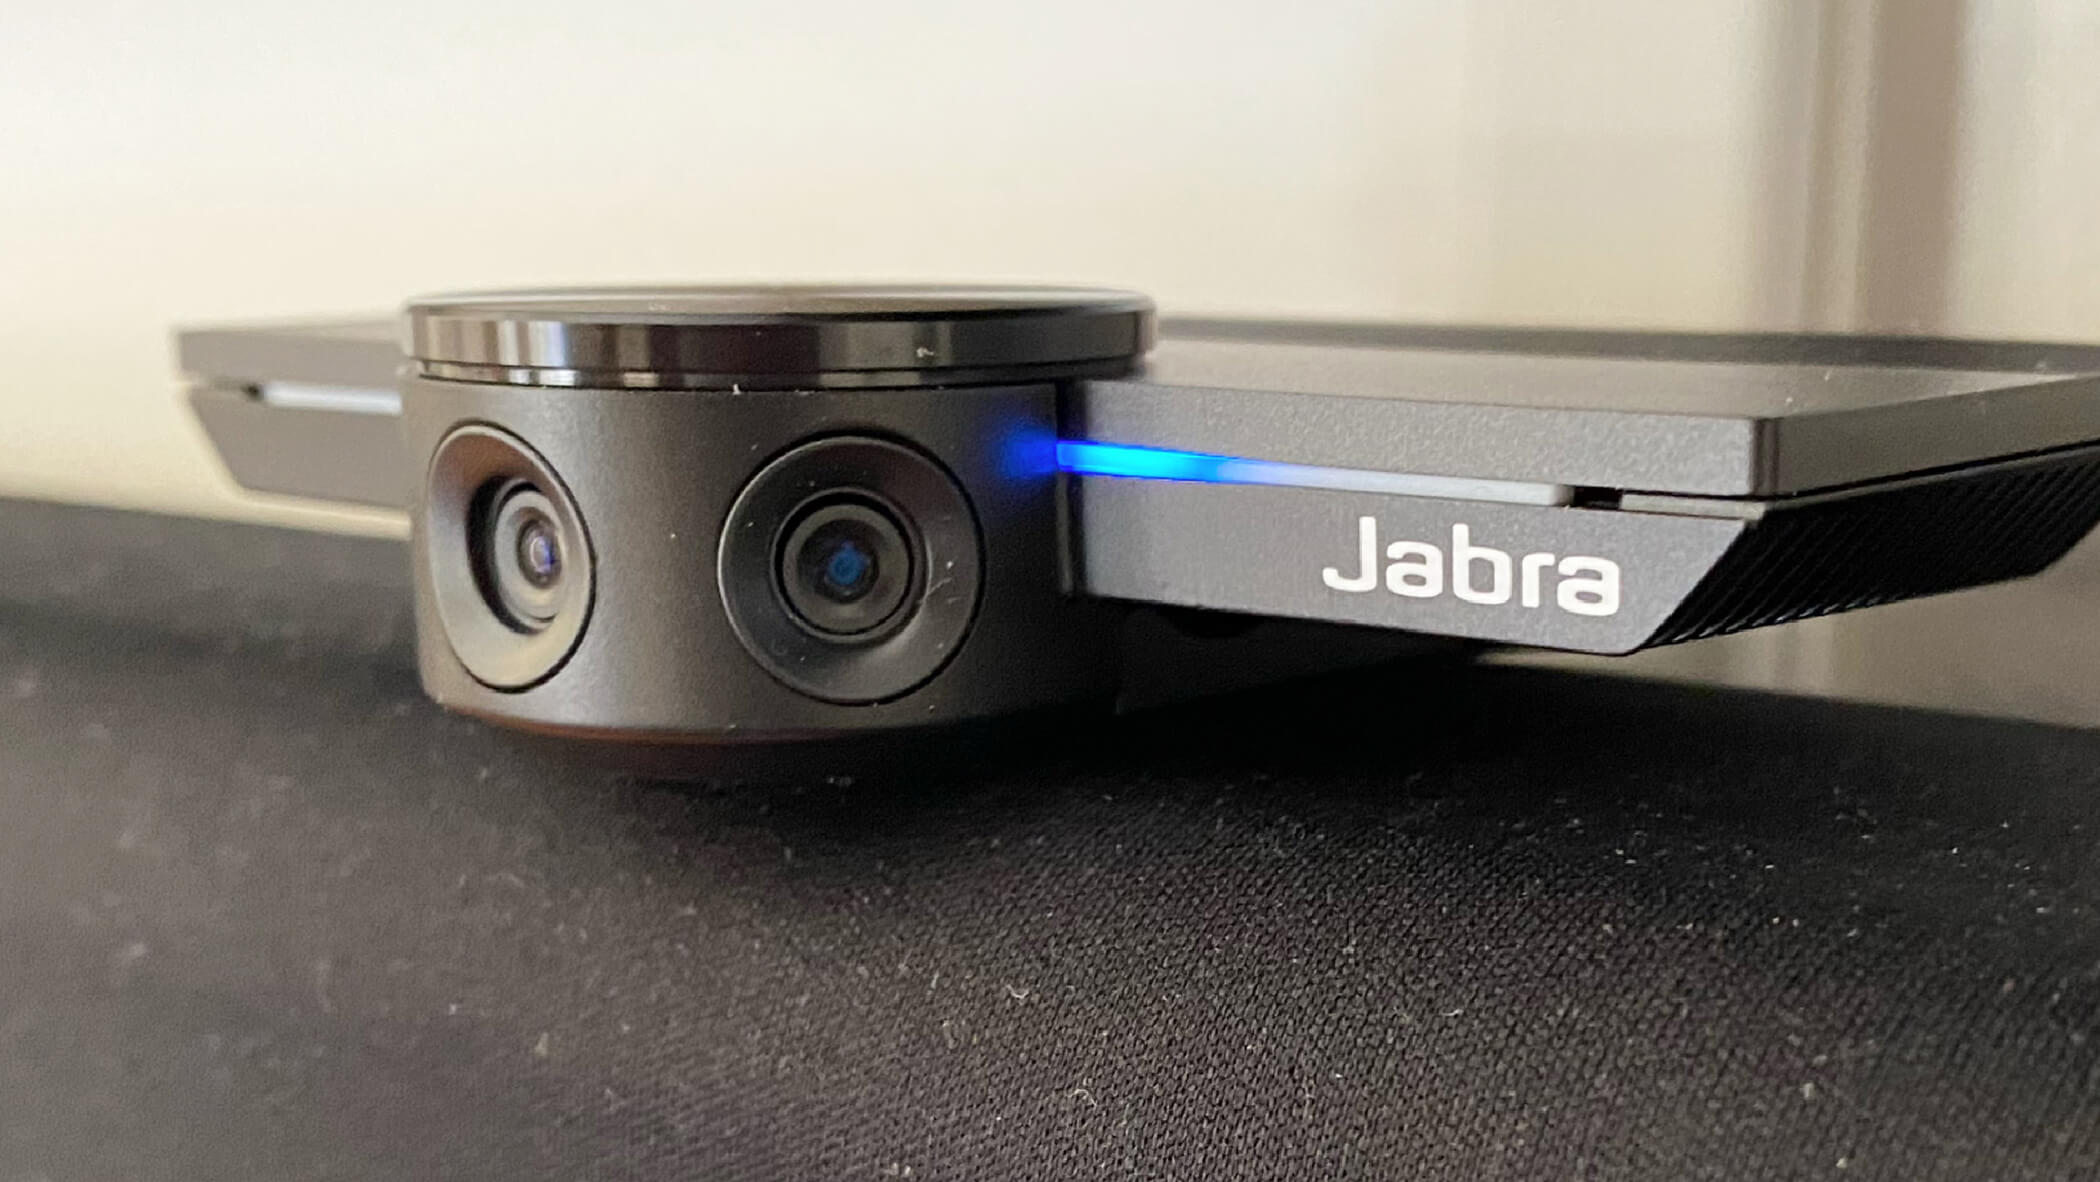 the jabra panacast device on our conference room wall